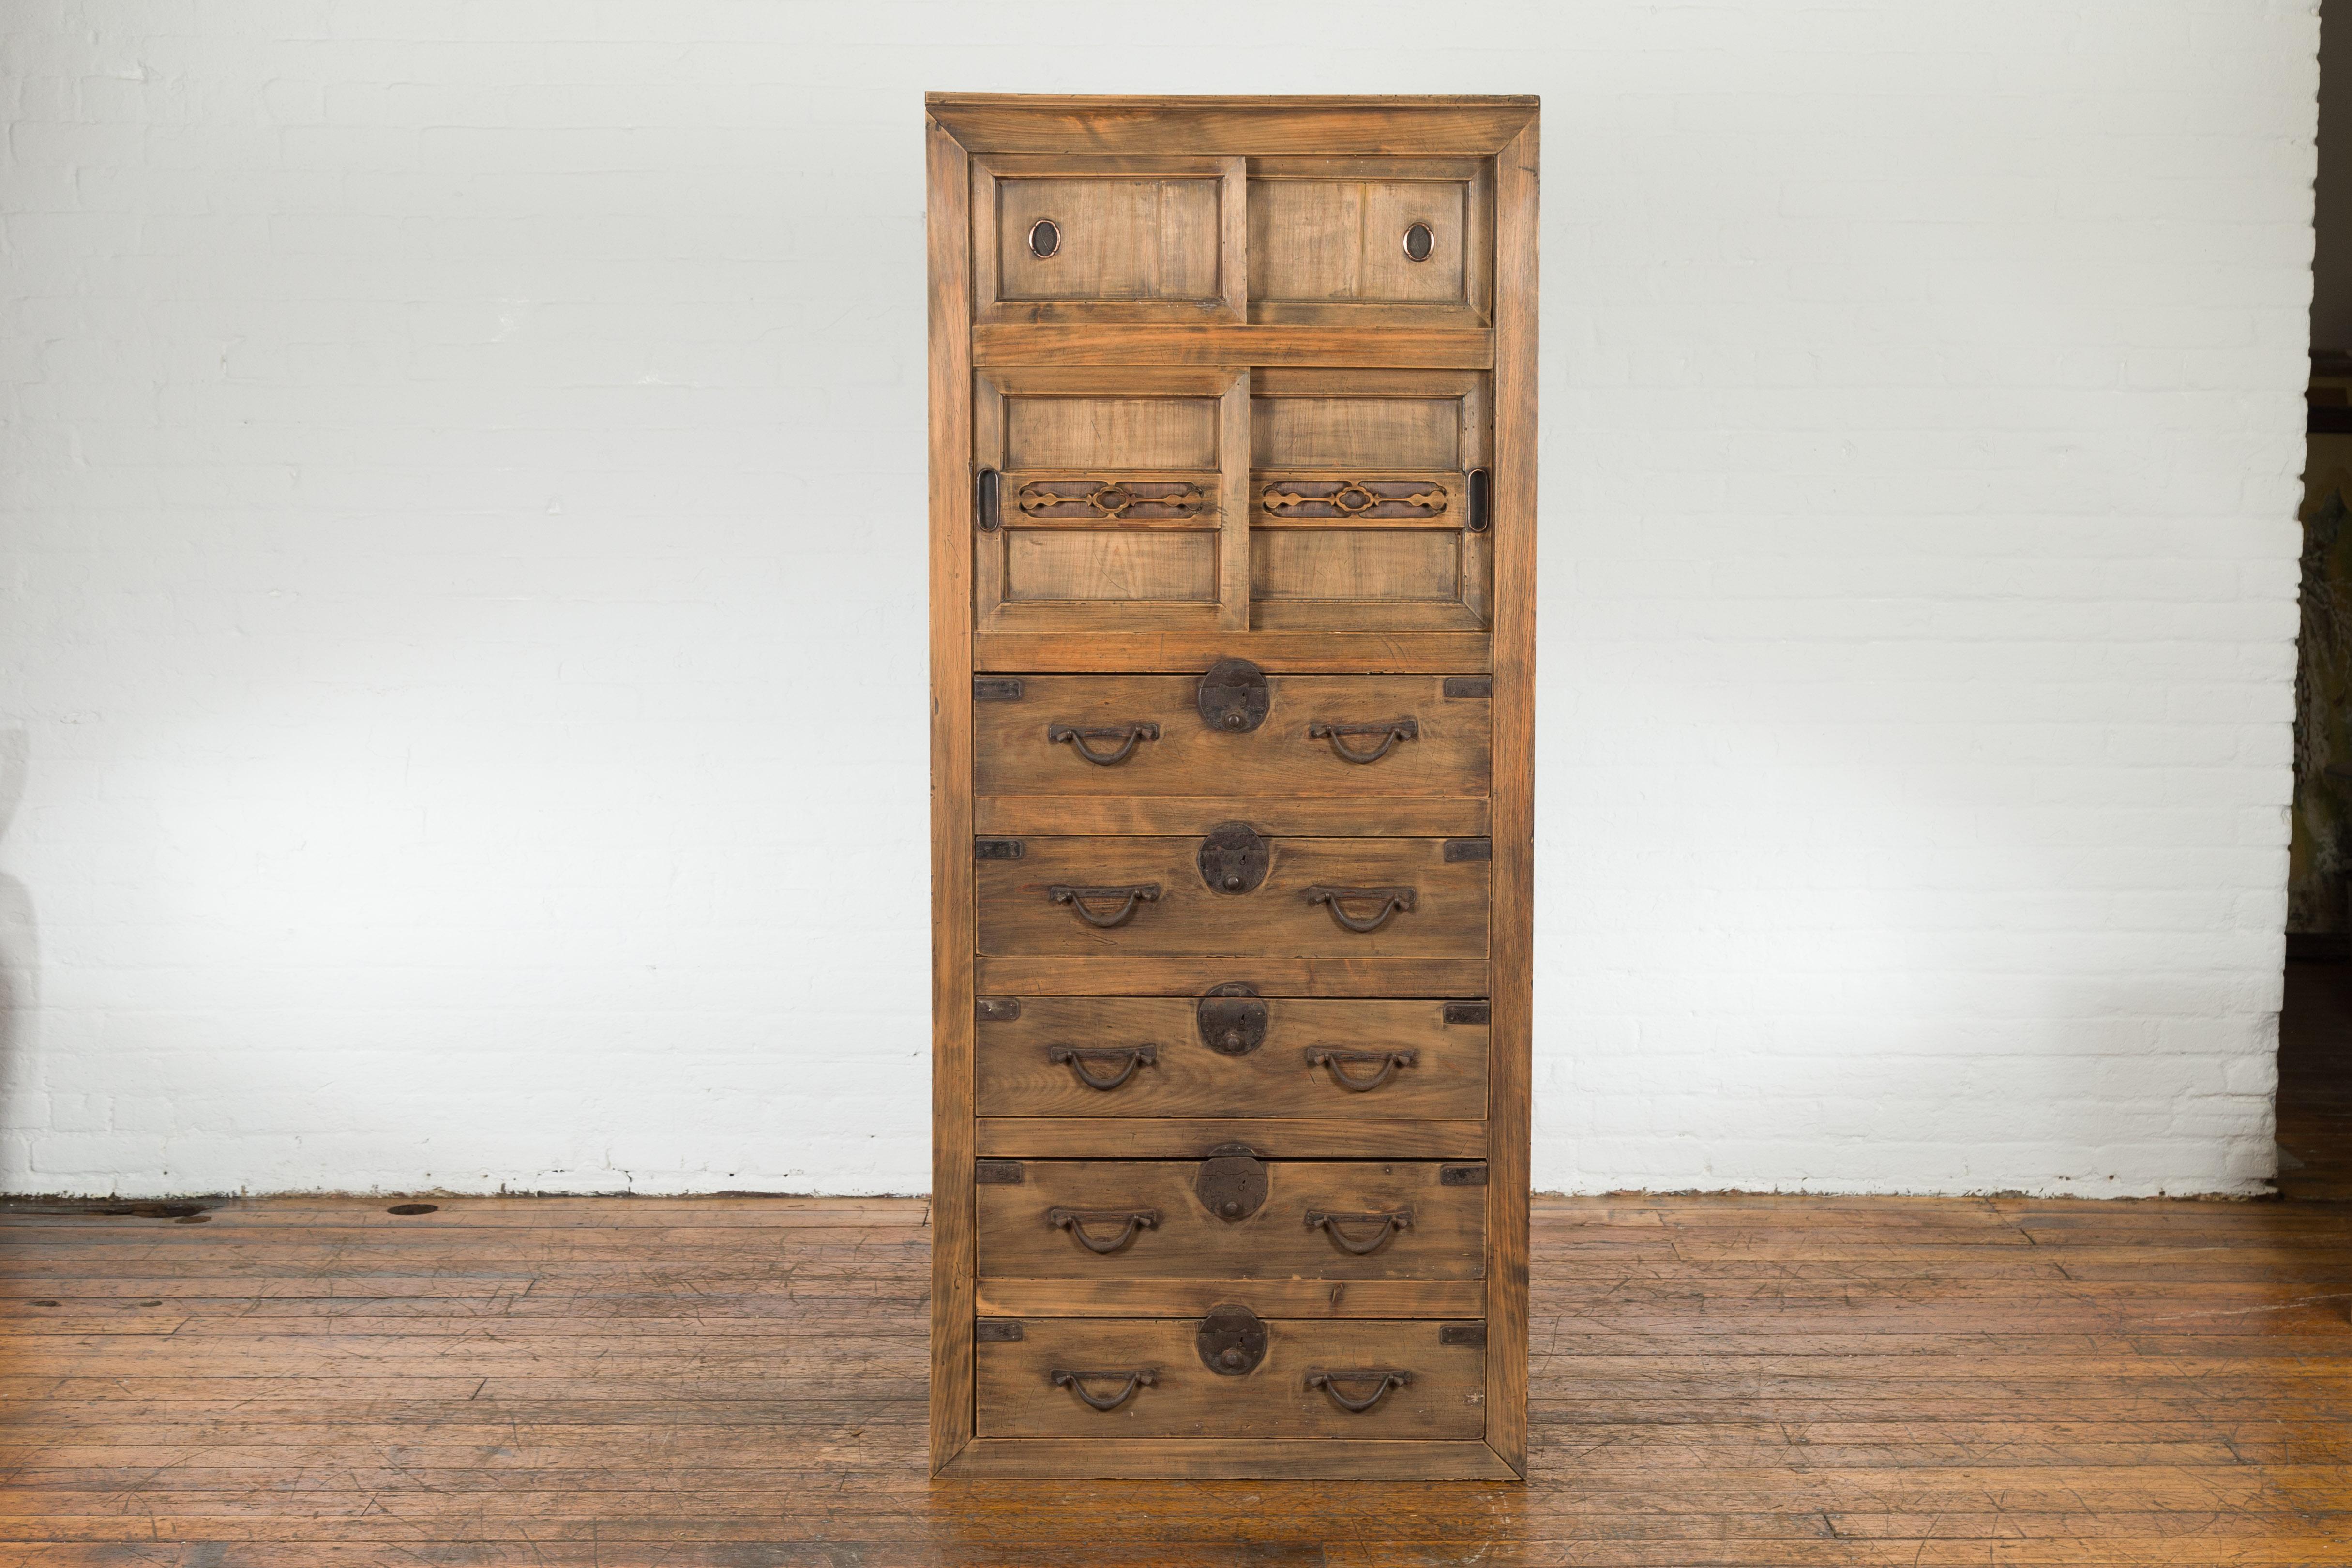 An Antique Japanese Meiji period Tansu clothing chest from the early 20th century, with iron hardware, carved panels, sliding doors, and five drawers. Created in Japan during the late Meiji period in the early years of the 20th century, this tall